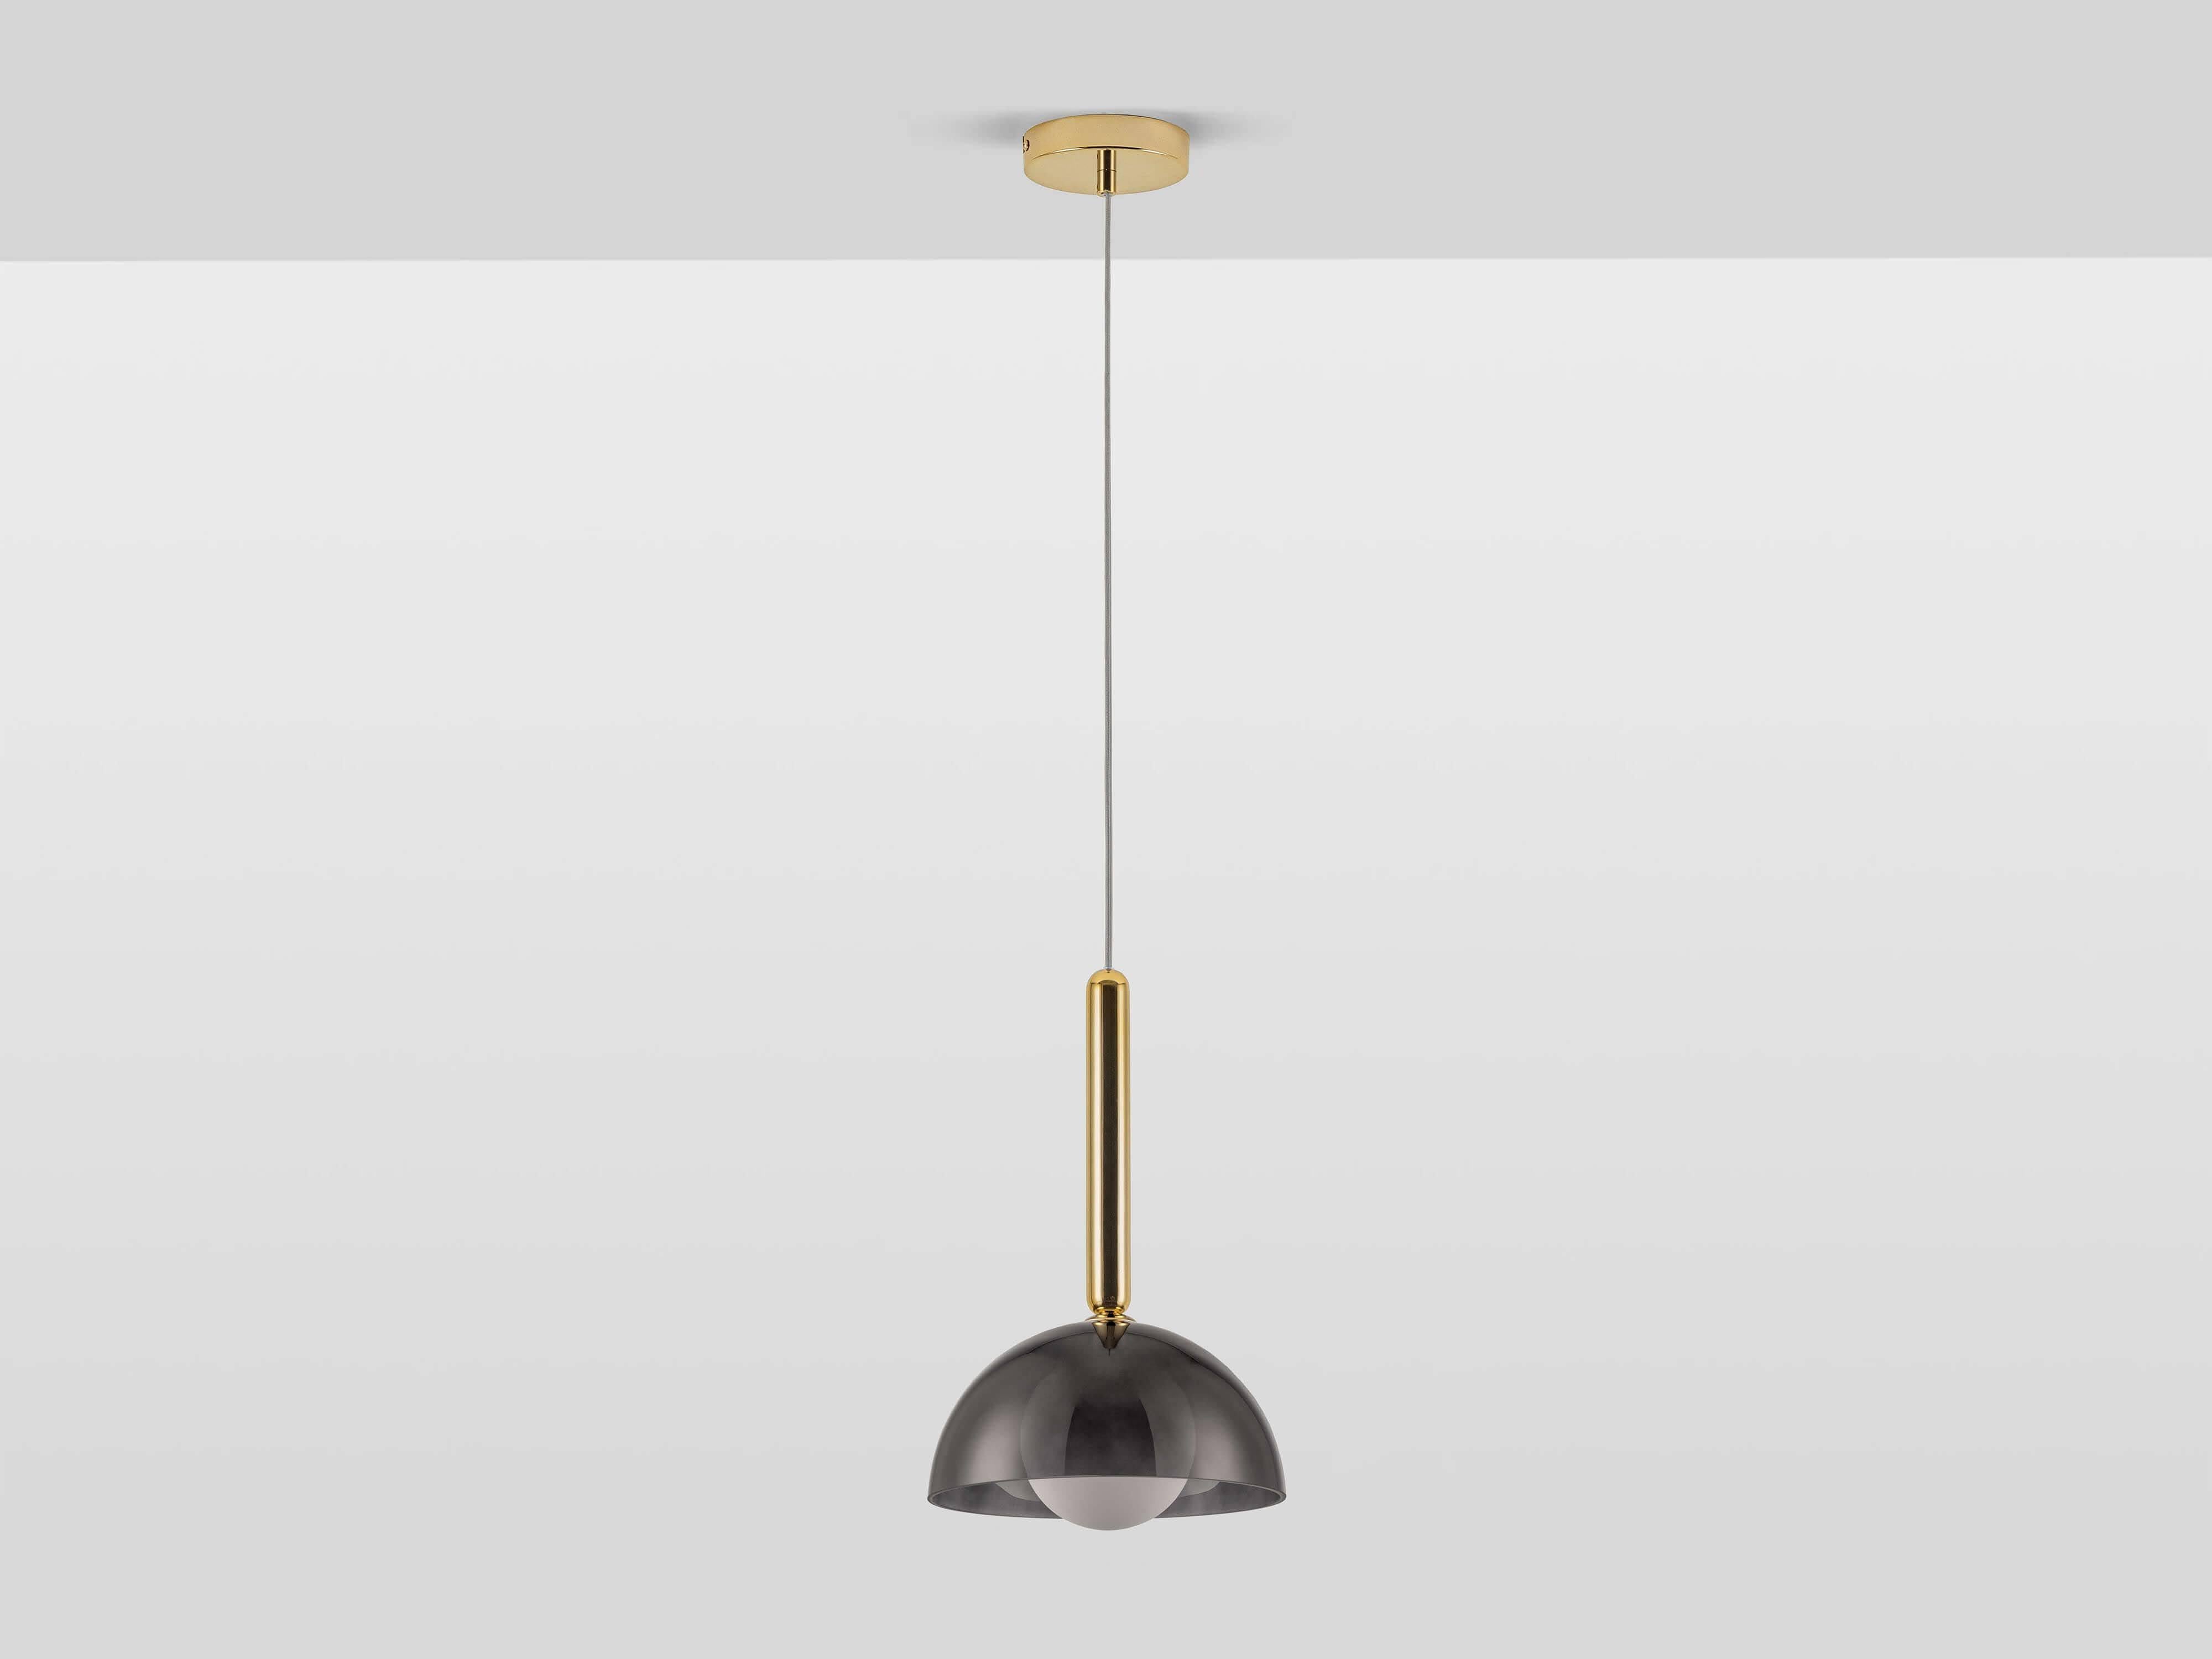 Used alone, in pairs, or more, these pendants cast a warm ambient light in any space. Perfect for over the breakfast bar, or as a statement hanging light in any room, they are delicate yet modern, with a glass dome housing the bulb, and hanging from